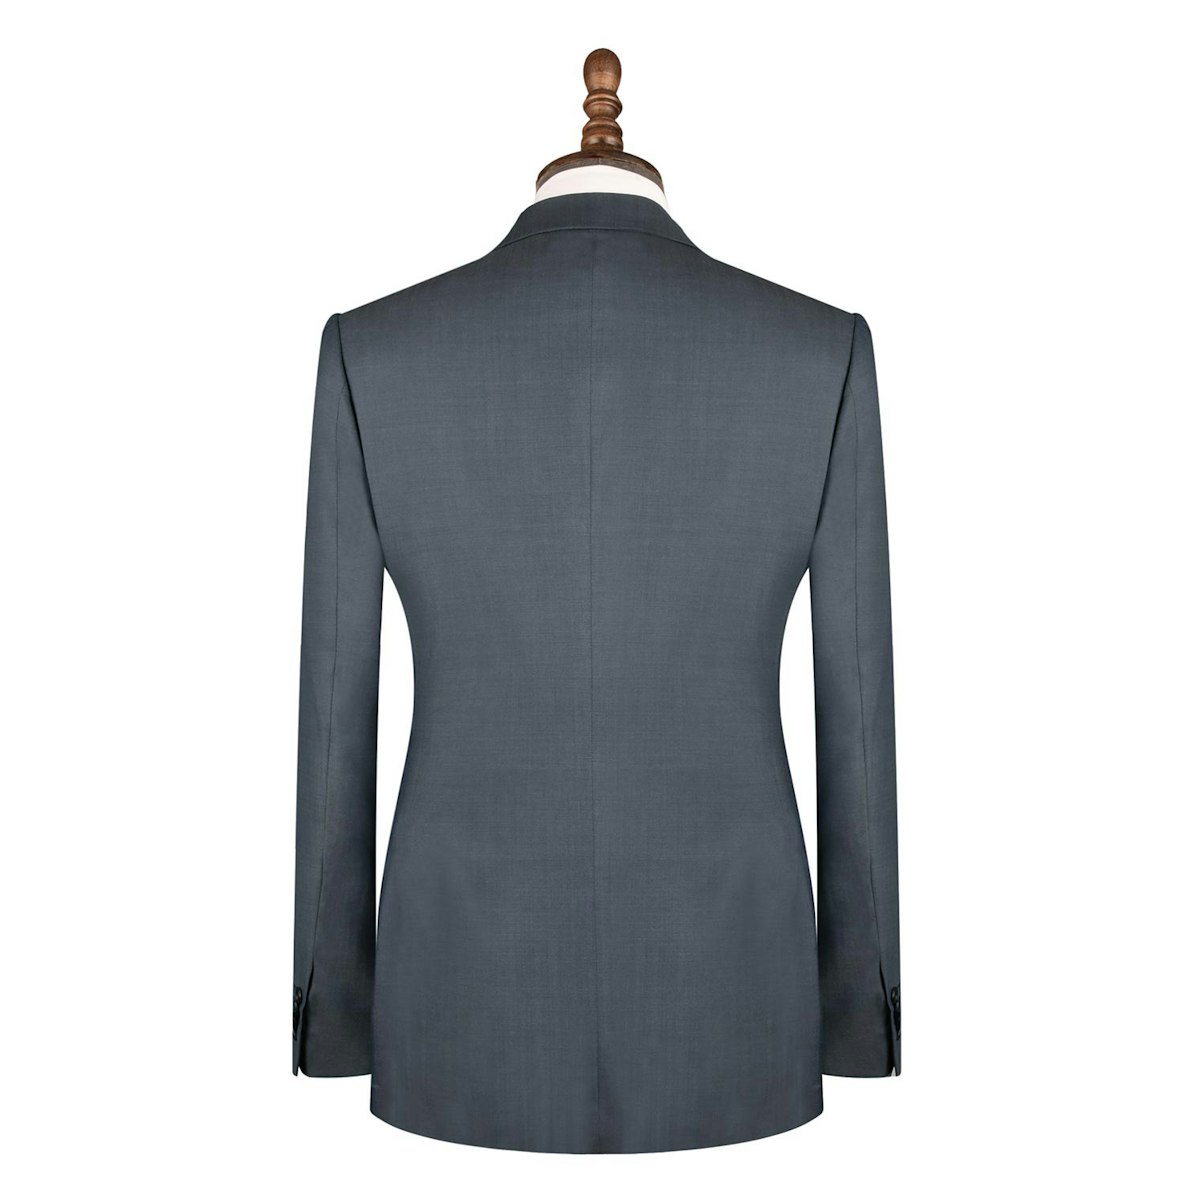 InStitchu Collection The Holyhead mens suit